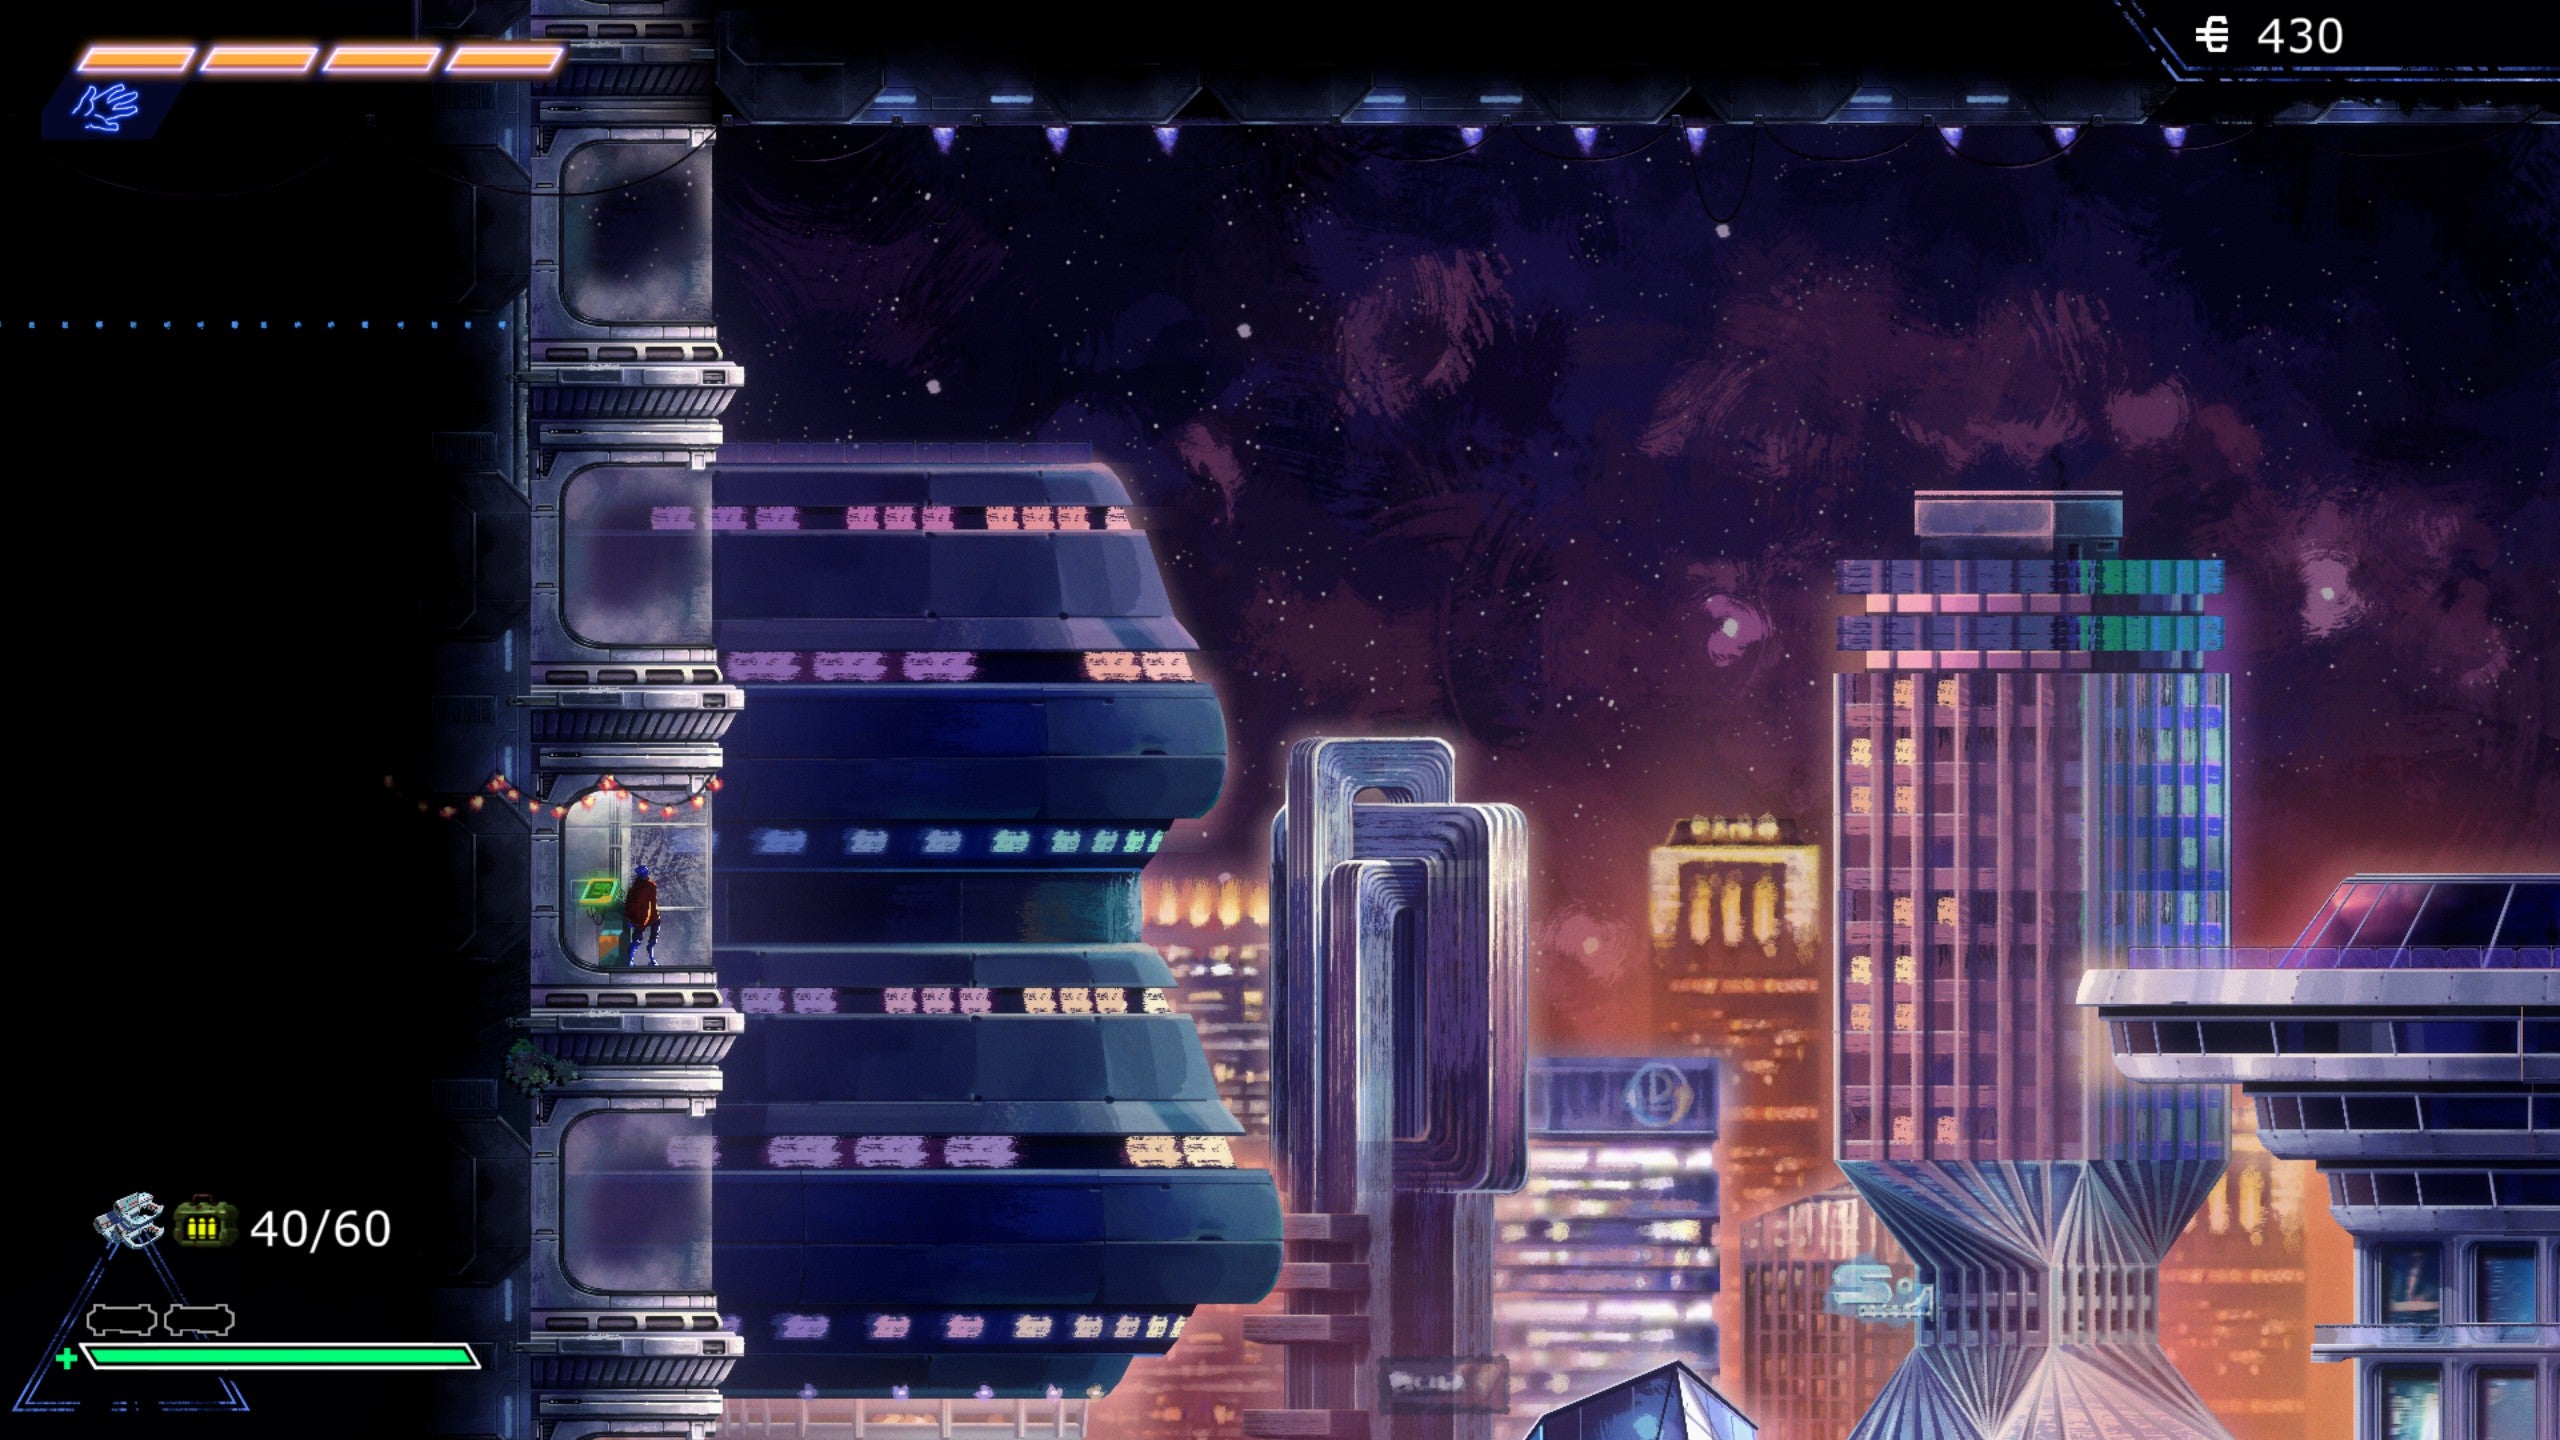 A screenshot from They Always Run. The player character is riding an elevator with a giant city in the background.